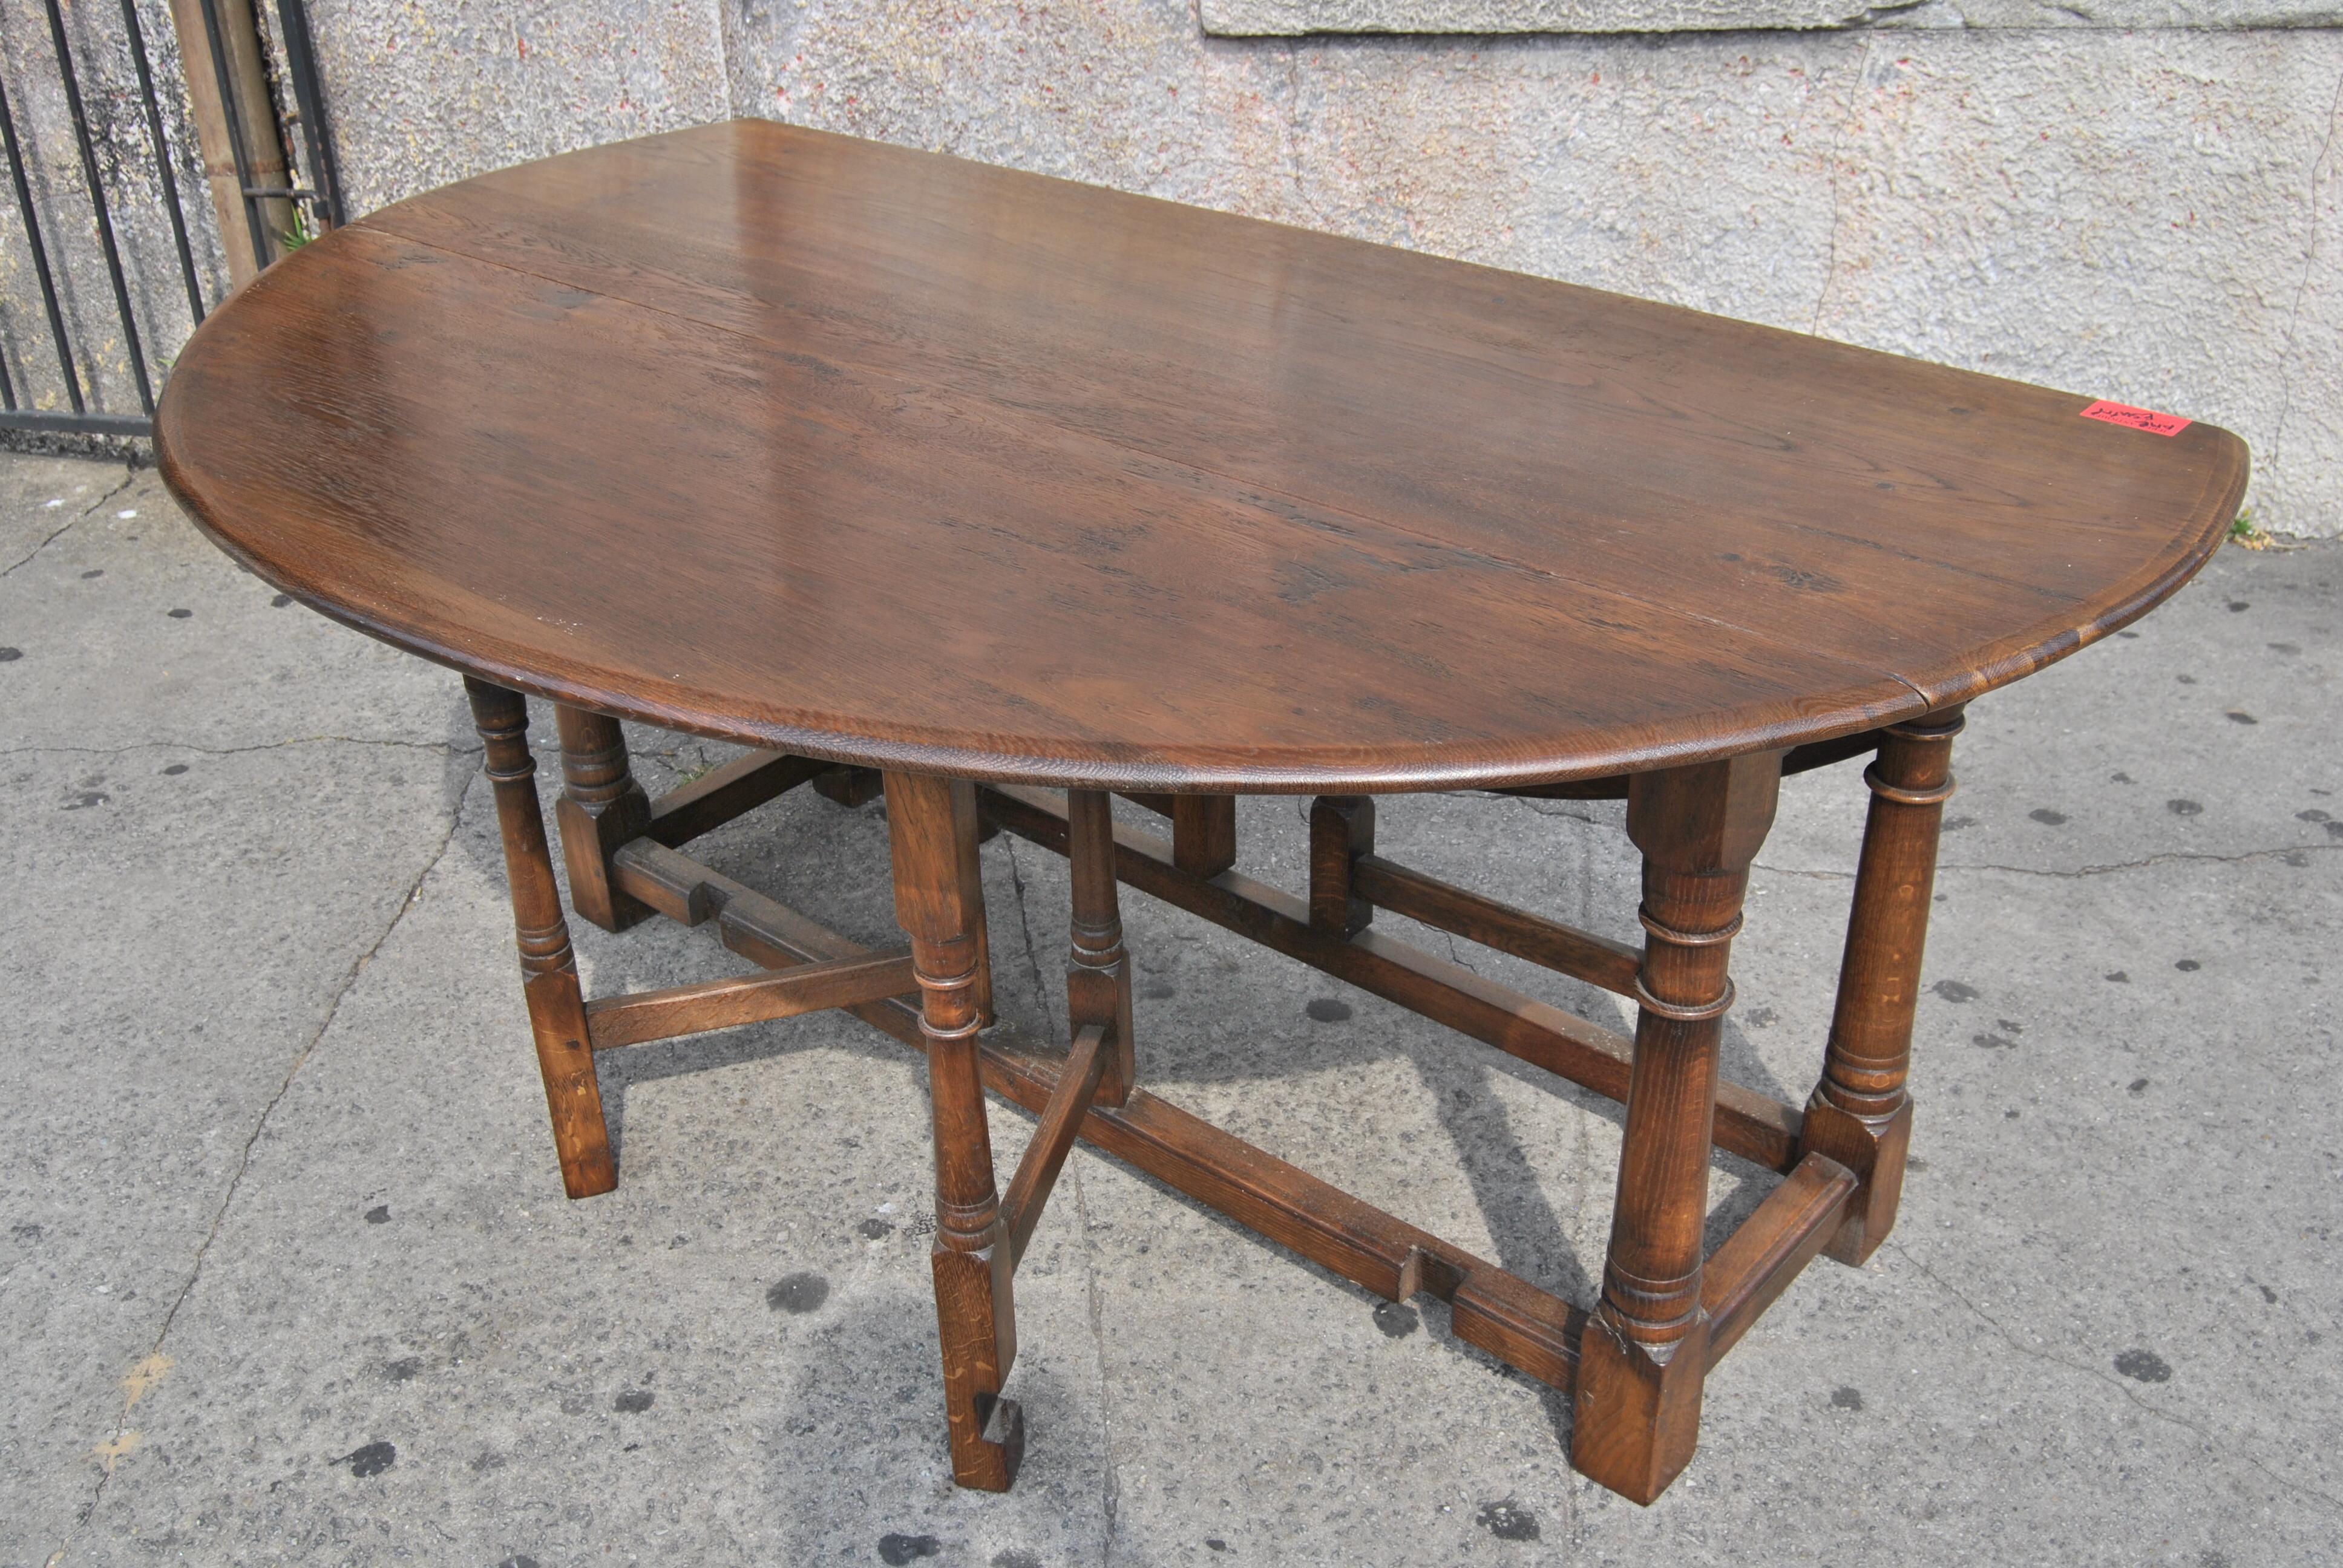 This is a solid oak gate leg table made in England, circa 1950. This table is also known as a Wake Table, a Hunt Table, a Hall Table, a drop-leaf table or sofa table. It is a very useful table in many situations. This table was bench made (all